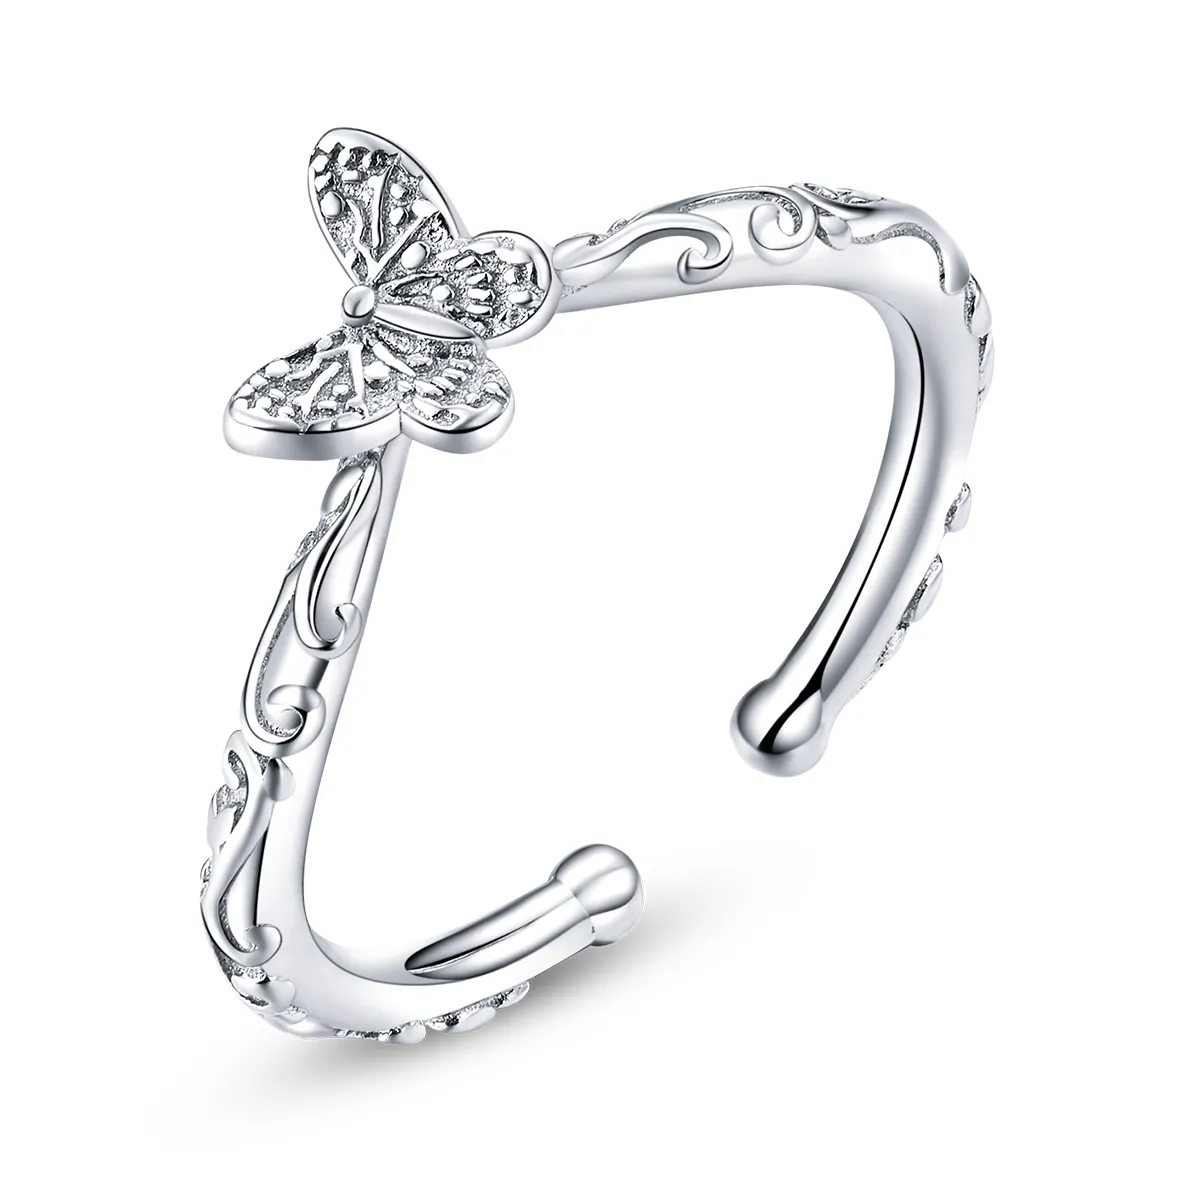 Pandora Style Silver Vintage Patterned Butterfly Open Ring - SCR634